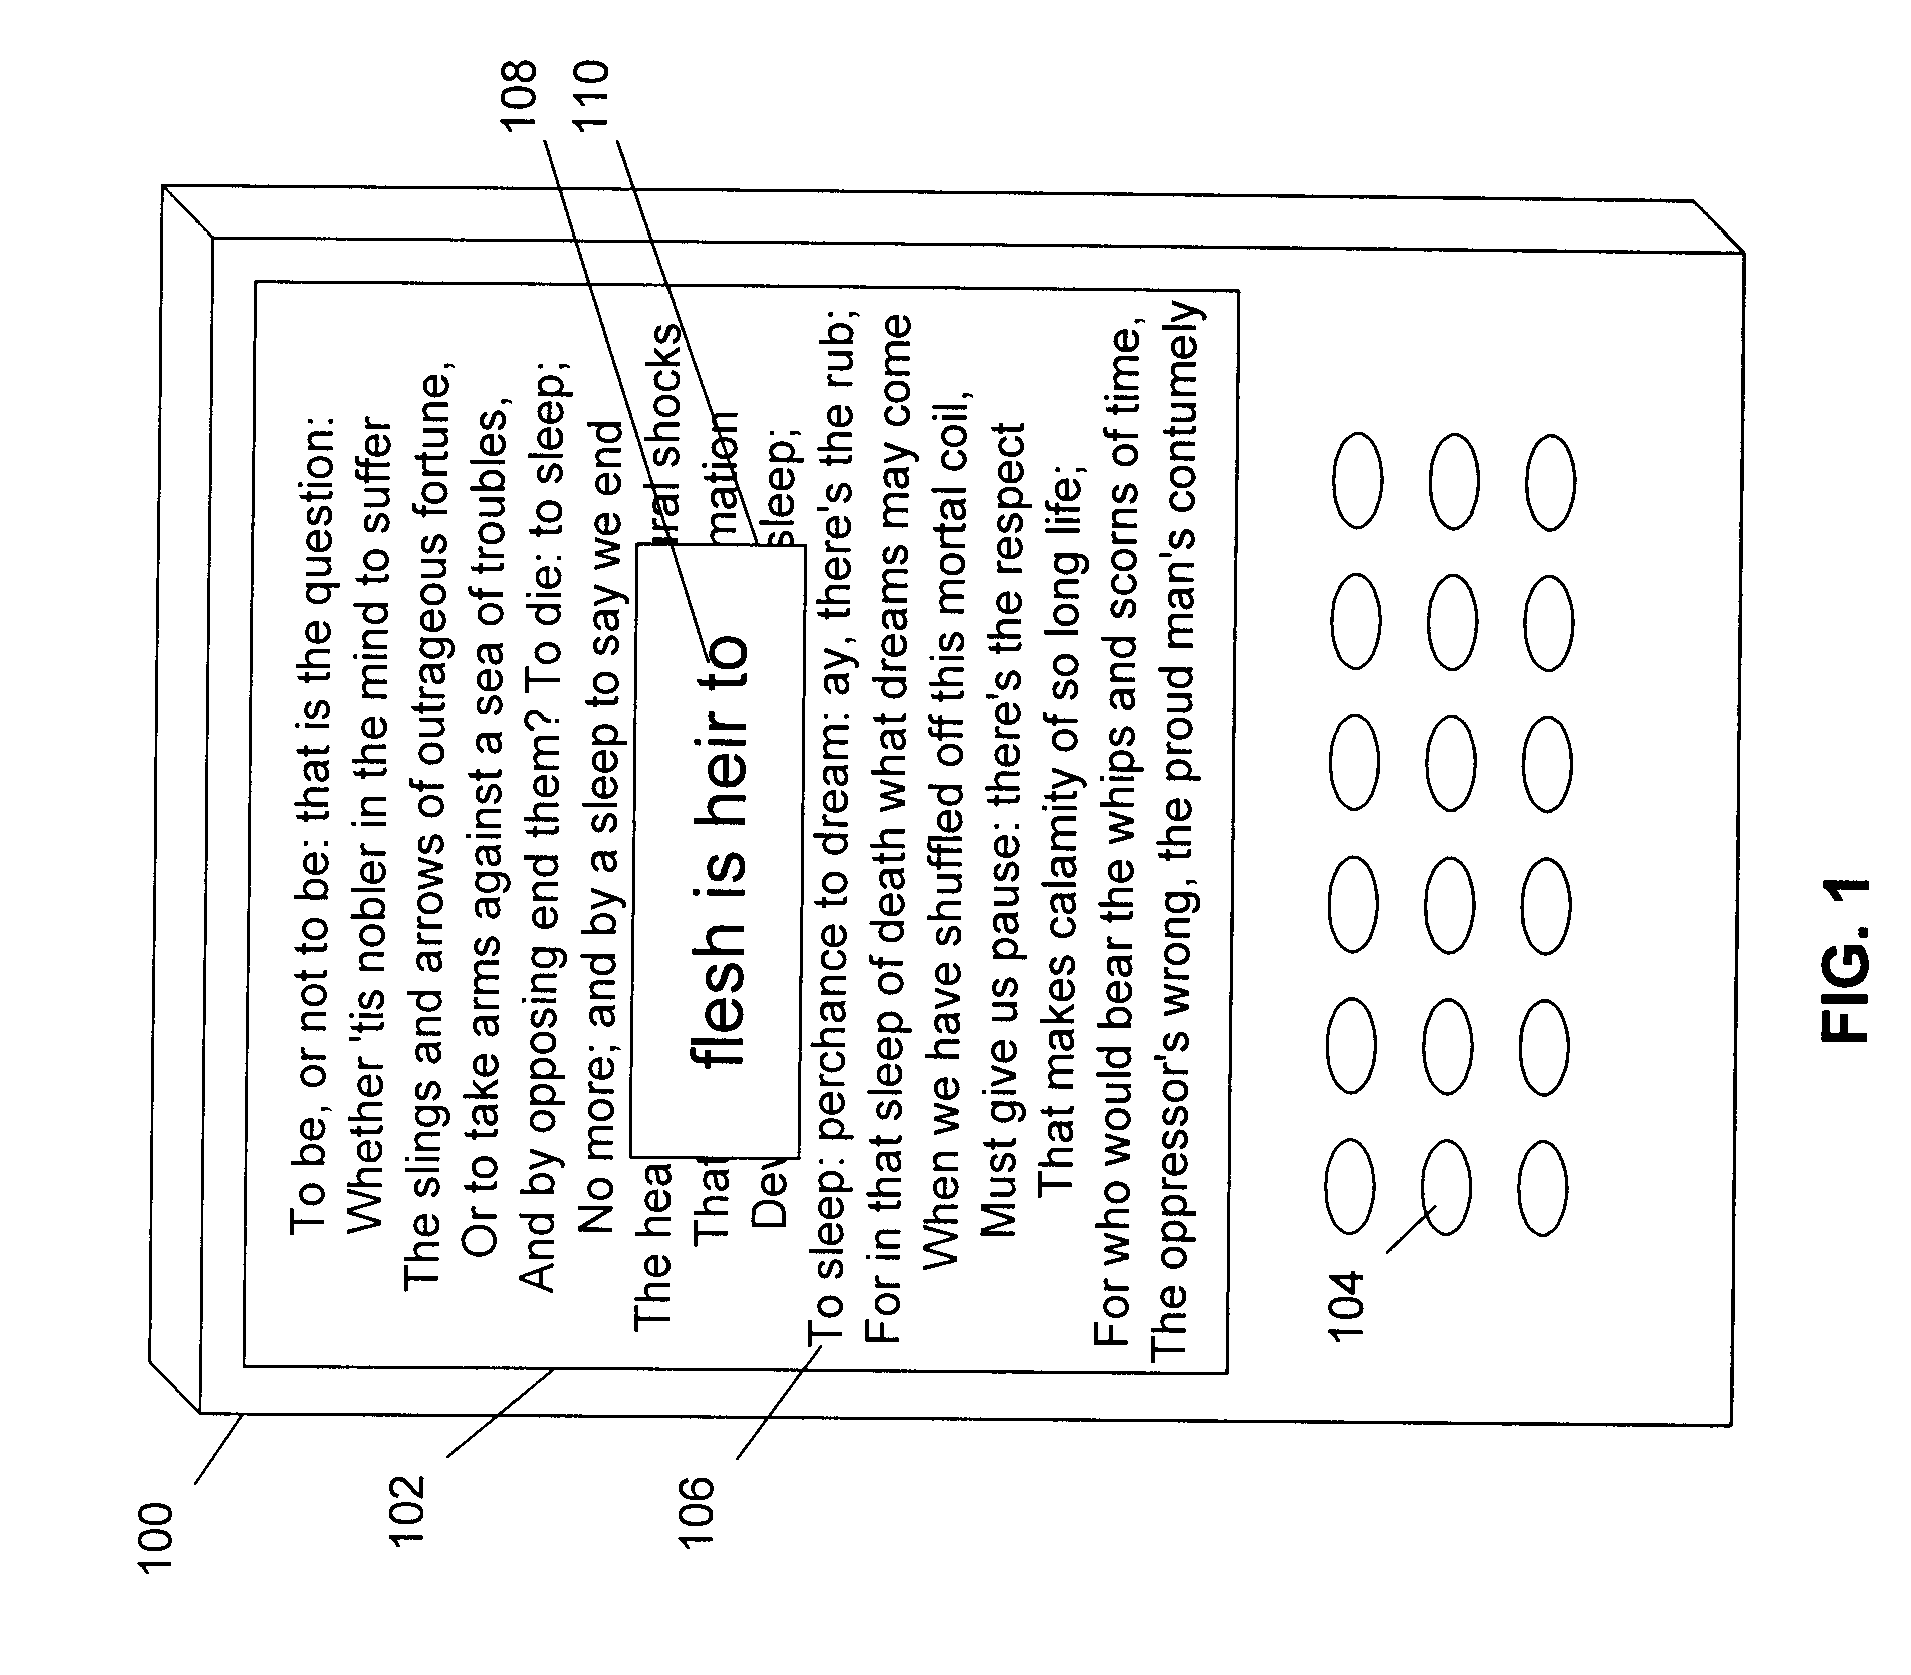 Automated sequential magnification of words on an electronic media reader